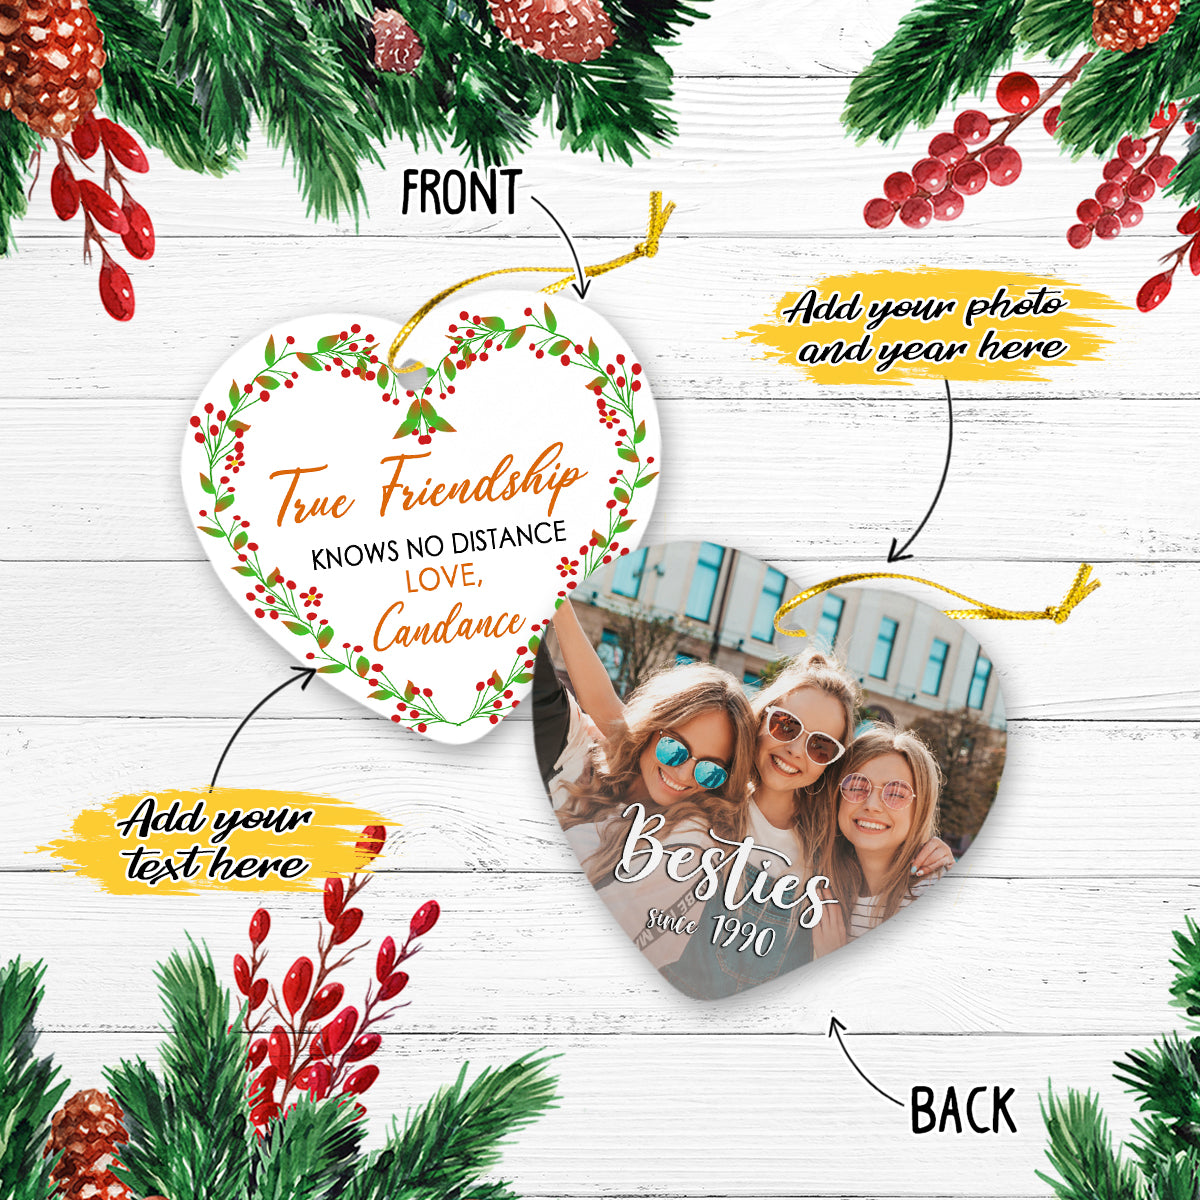 To My Best Friend Besties Personalized Christmas Premium Ceramic Ornaments Sets for Christmas Tree